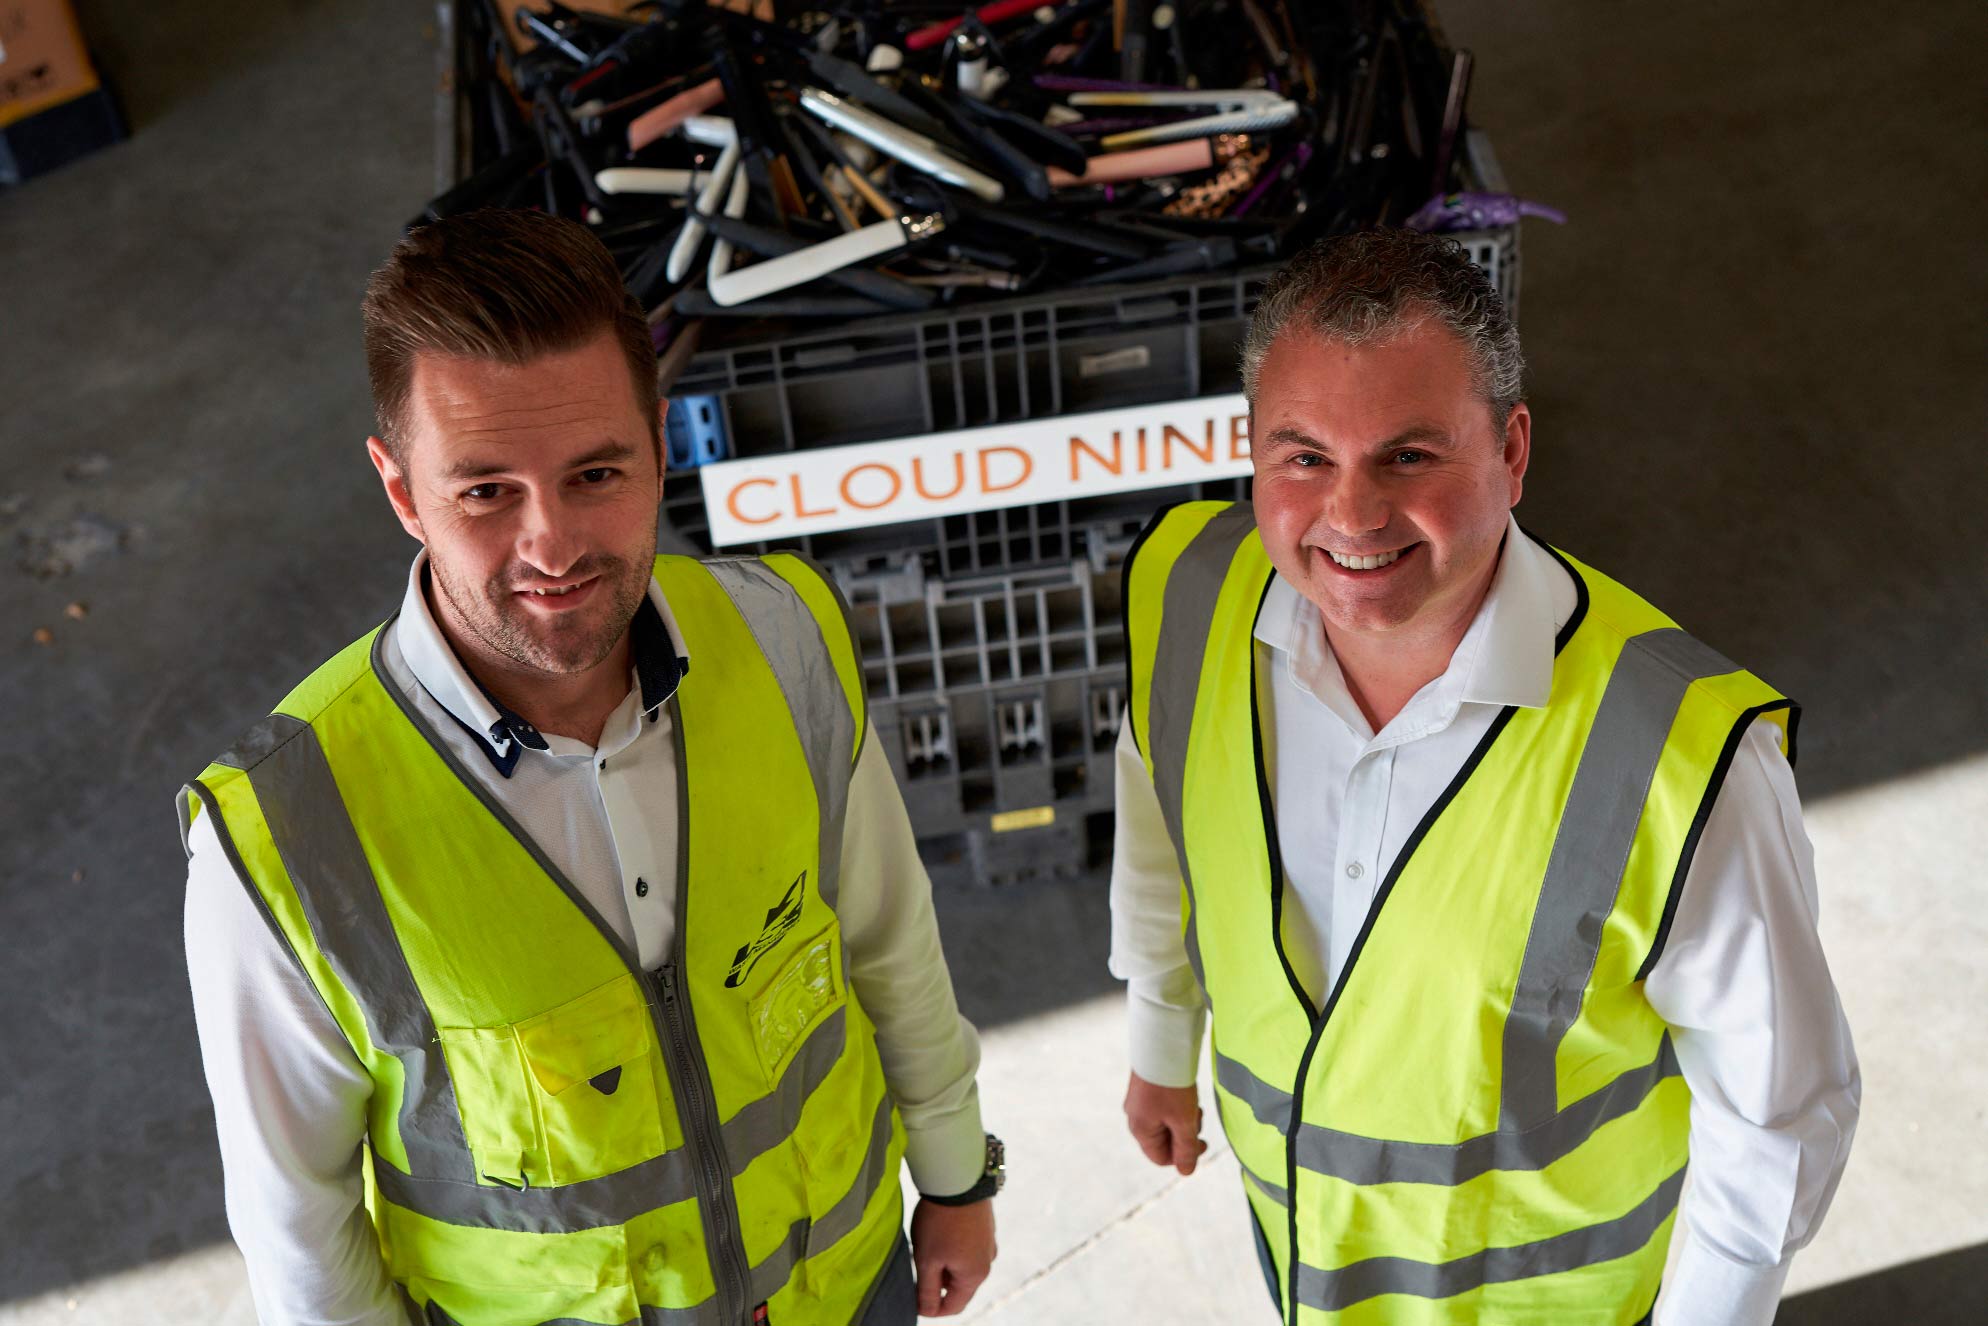 LSS straightens up e-waste recycling problem with Cloud Nine – Mark Russell of LSS (left) and Martin Rae of Cloud Nine (right)